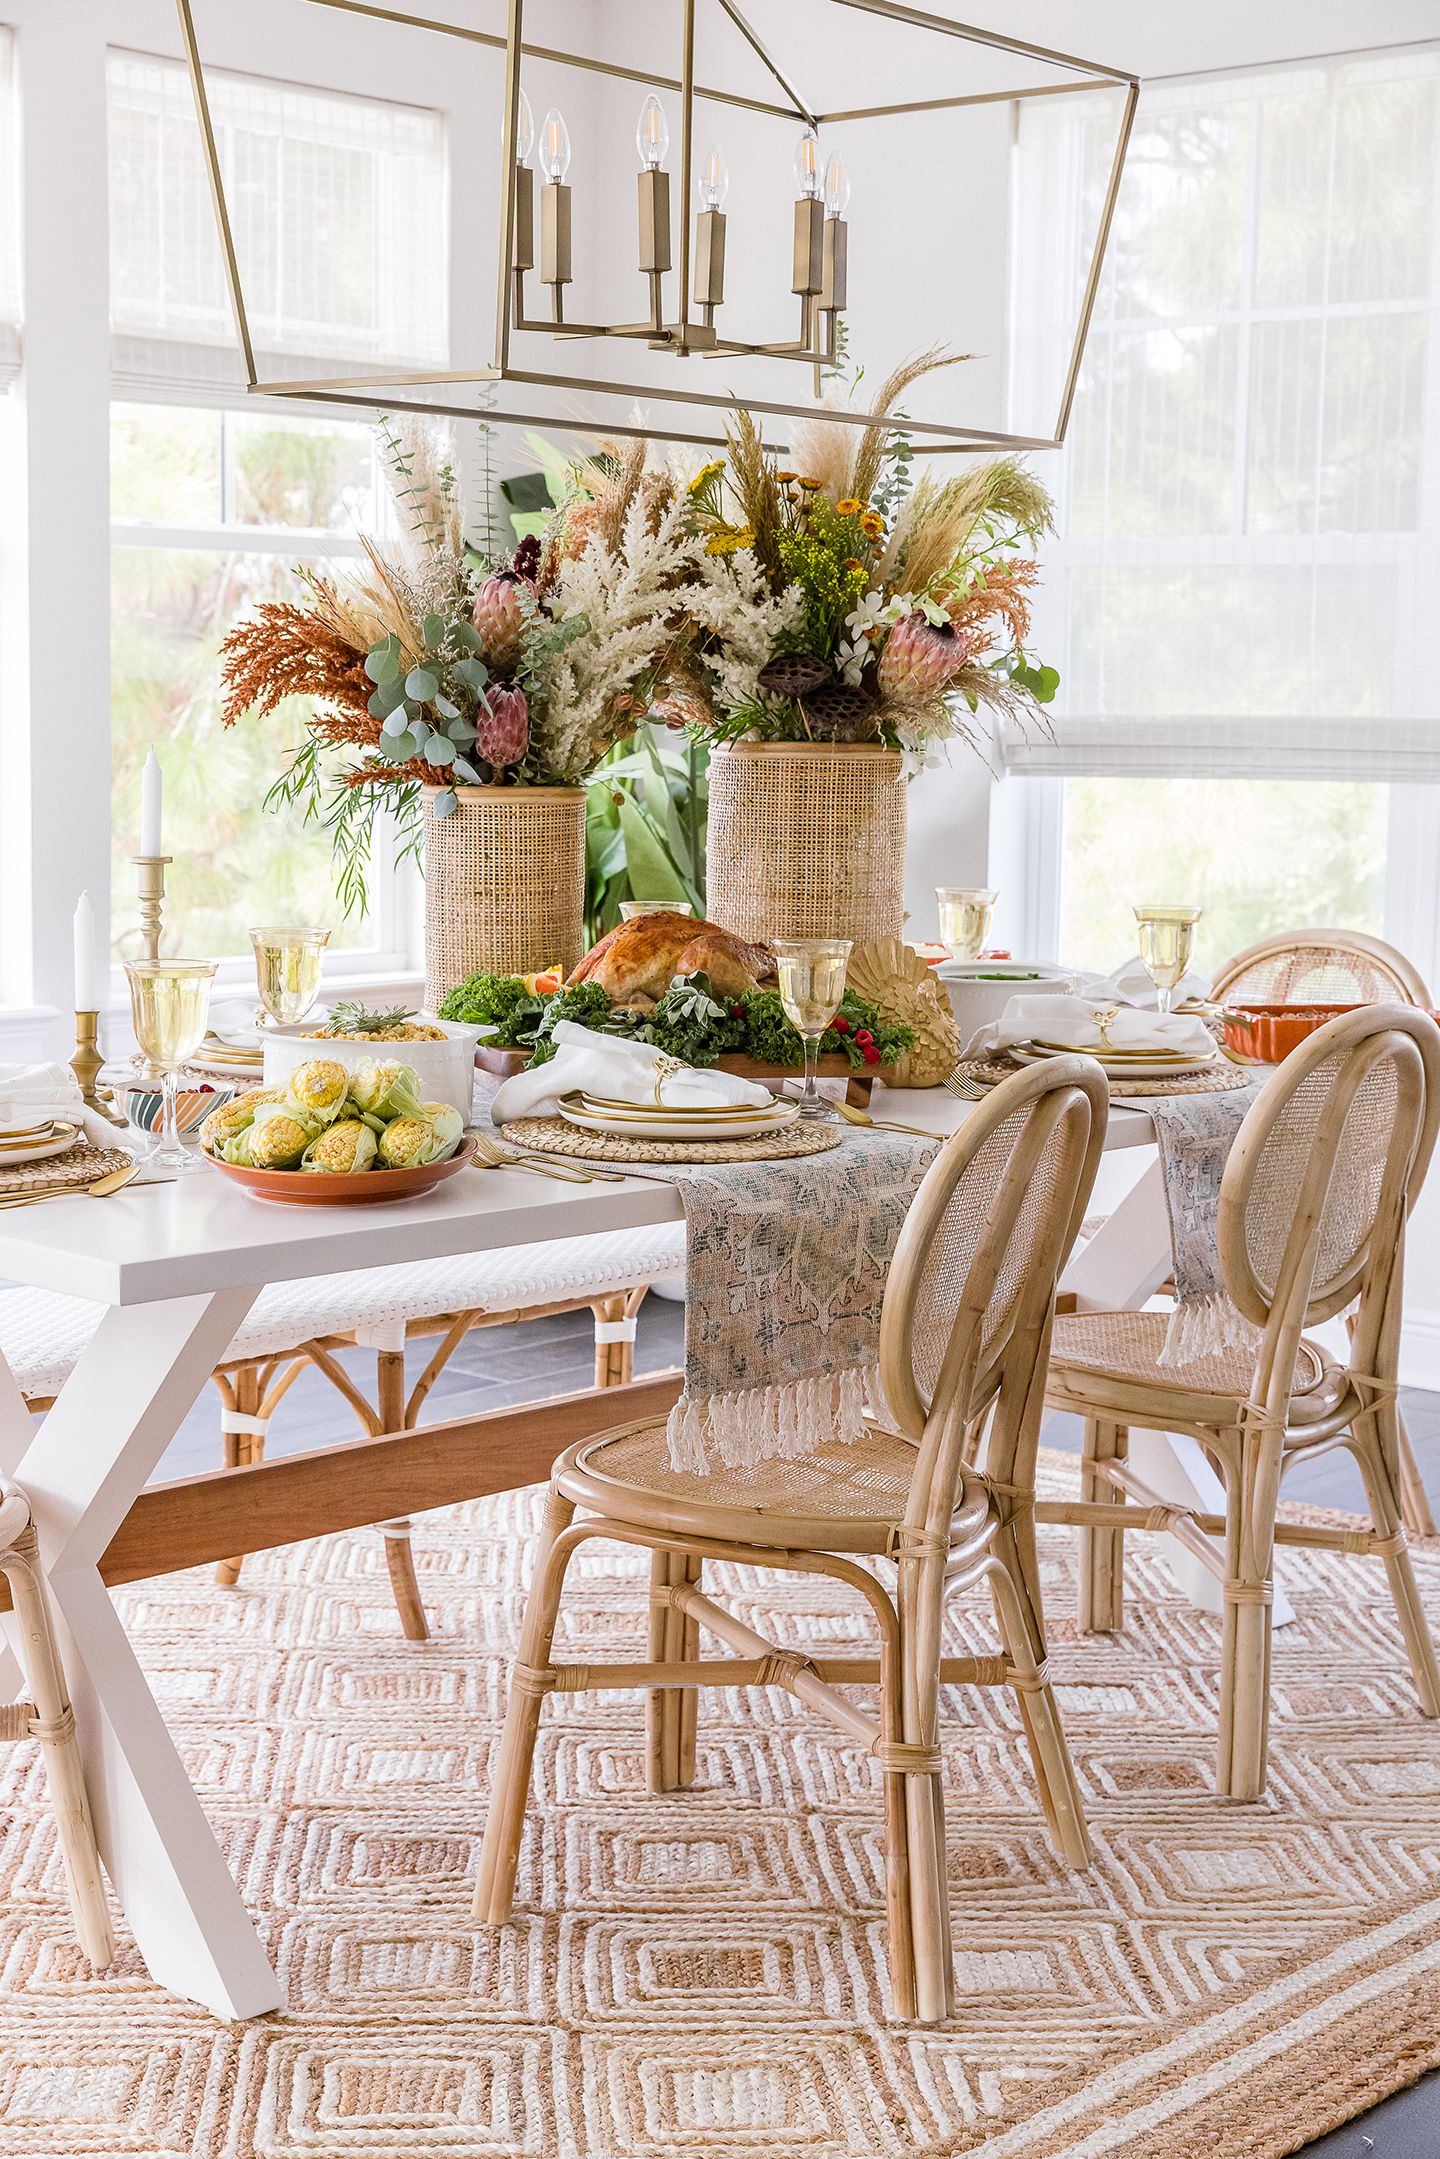 15 Ways to Decorate With Pampas Grass